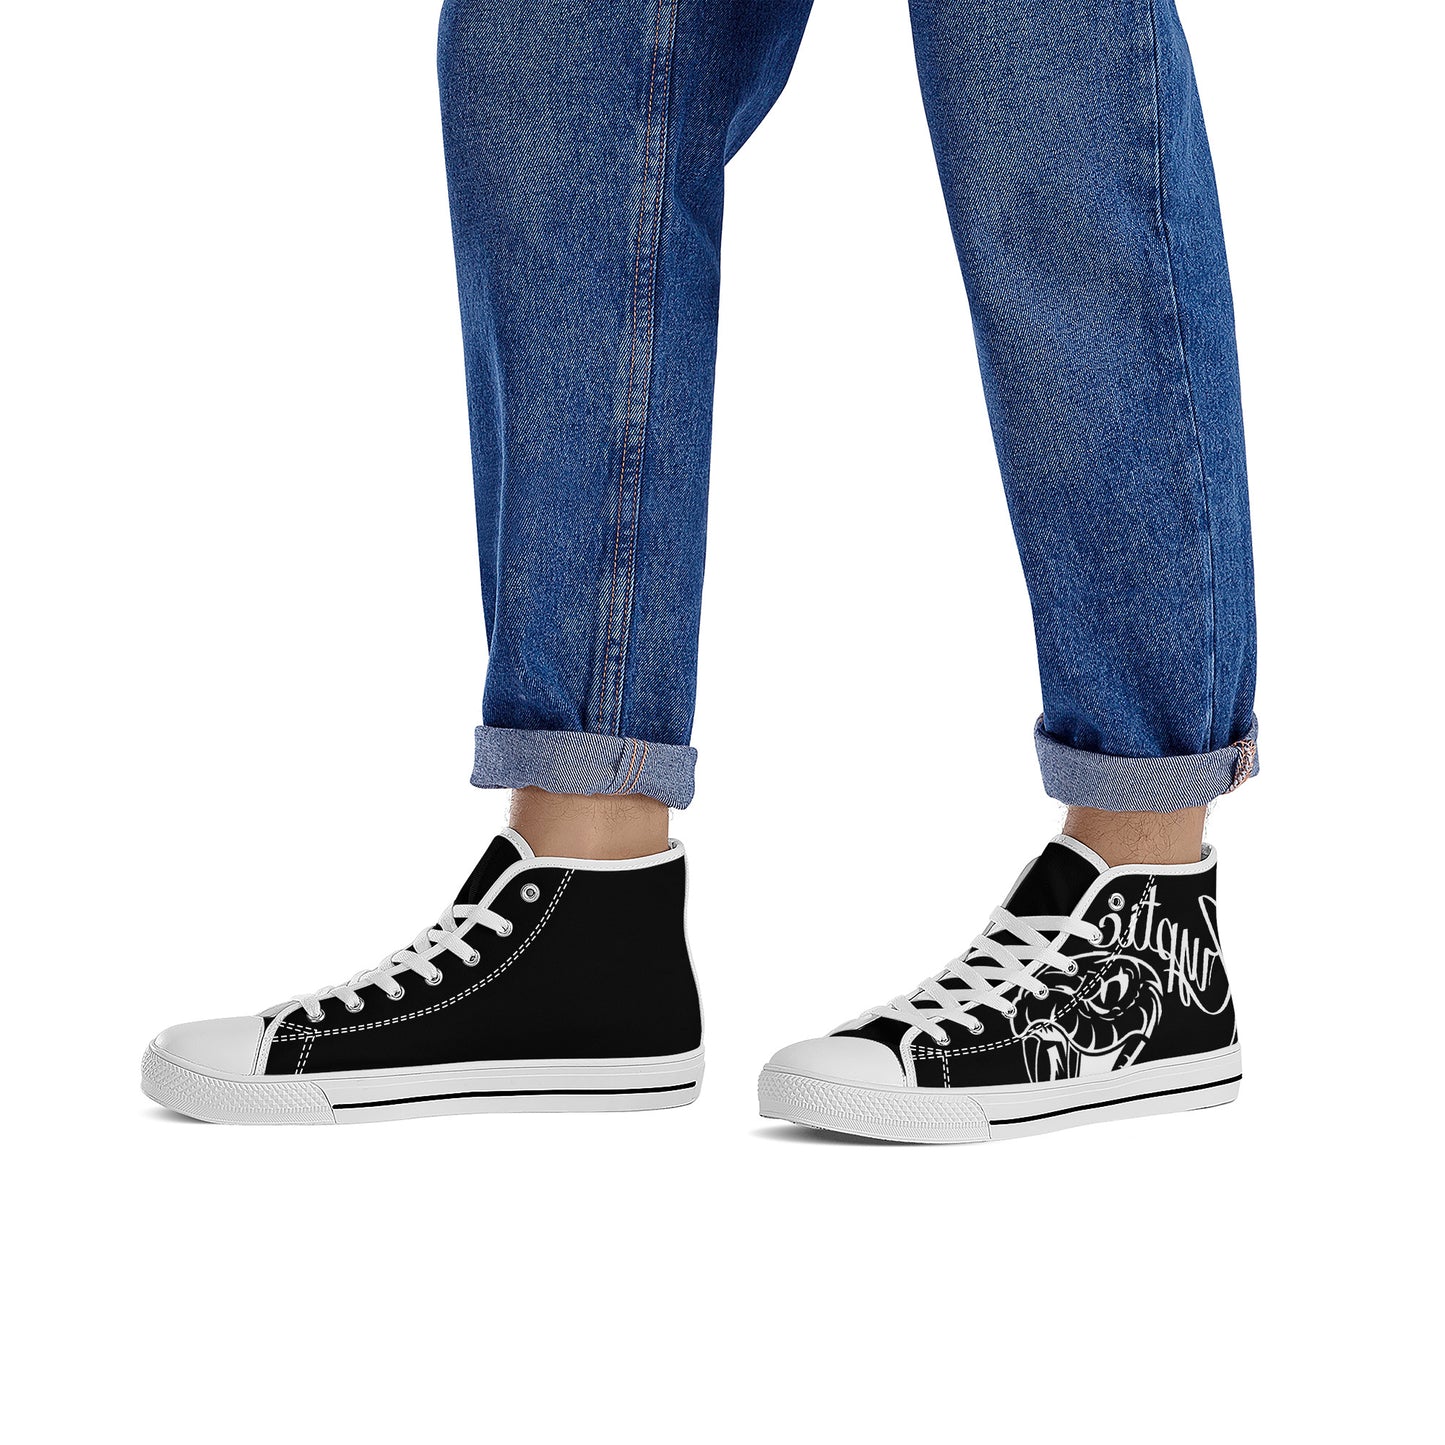 Cryptic High-Top Canvas Shoes With Customized Tongue, Black